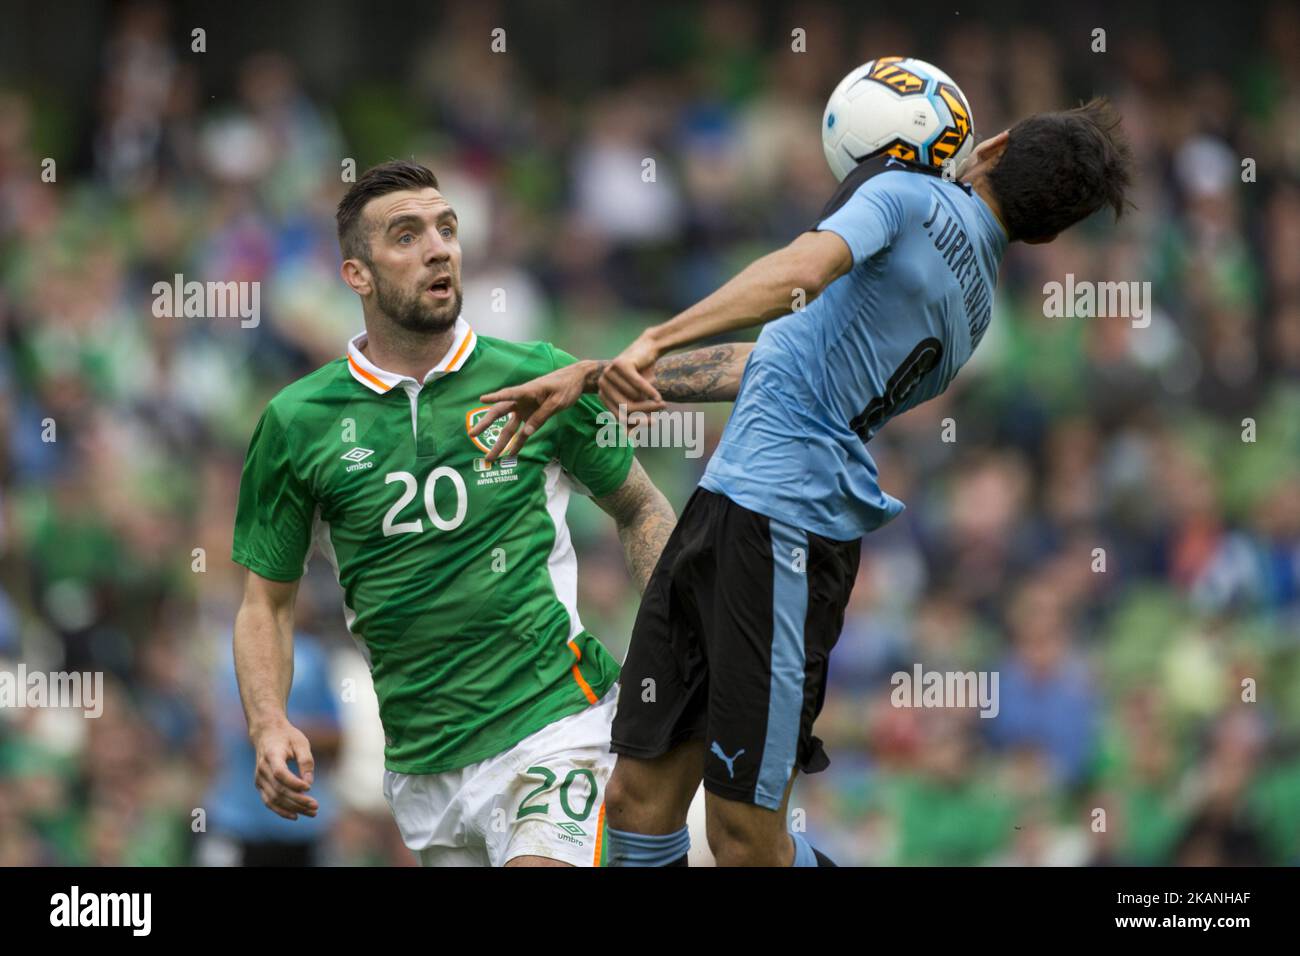 Jonathan Urretaviscaya of Uruguay and Shane Duffy of Ireland pictured in action during the International Friendly match between Republic of Ireland and Uruguay at Aviva Stadium in Dublin, Ireland on June 4, 2017 Republic of Ireland defeats Uruguay 3-1. (Photo by Andrew Surma/NurPhoto) *** Please Use Credit from Credit Field *** Stock Photo